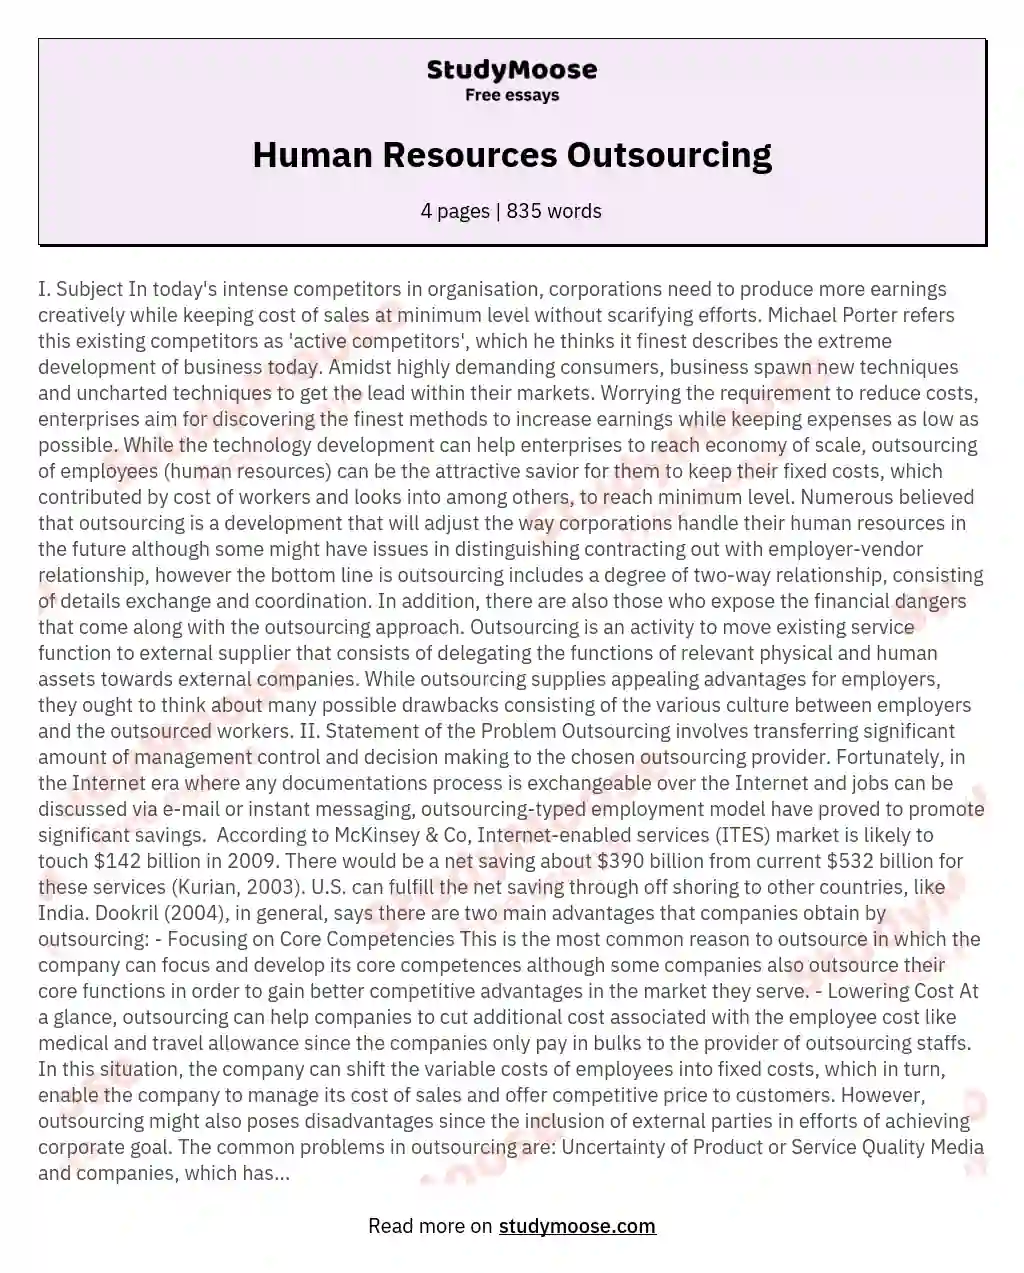 Human Resources Outsourcing essay